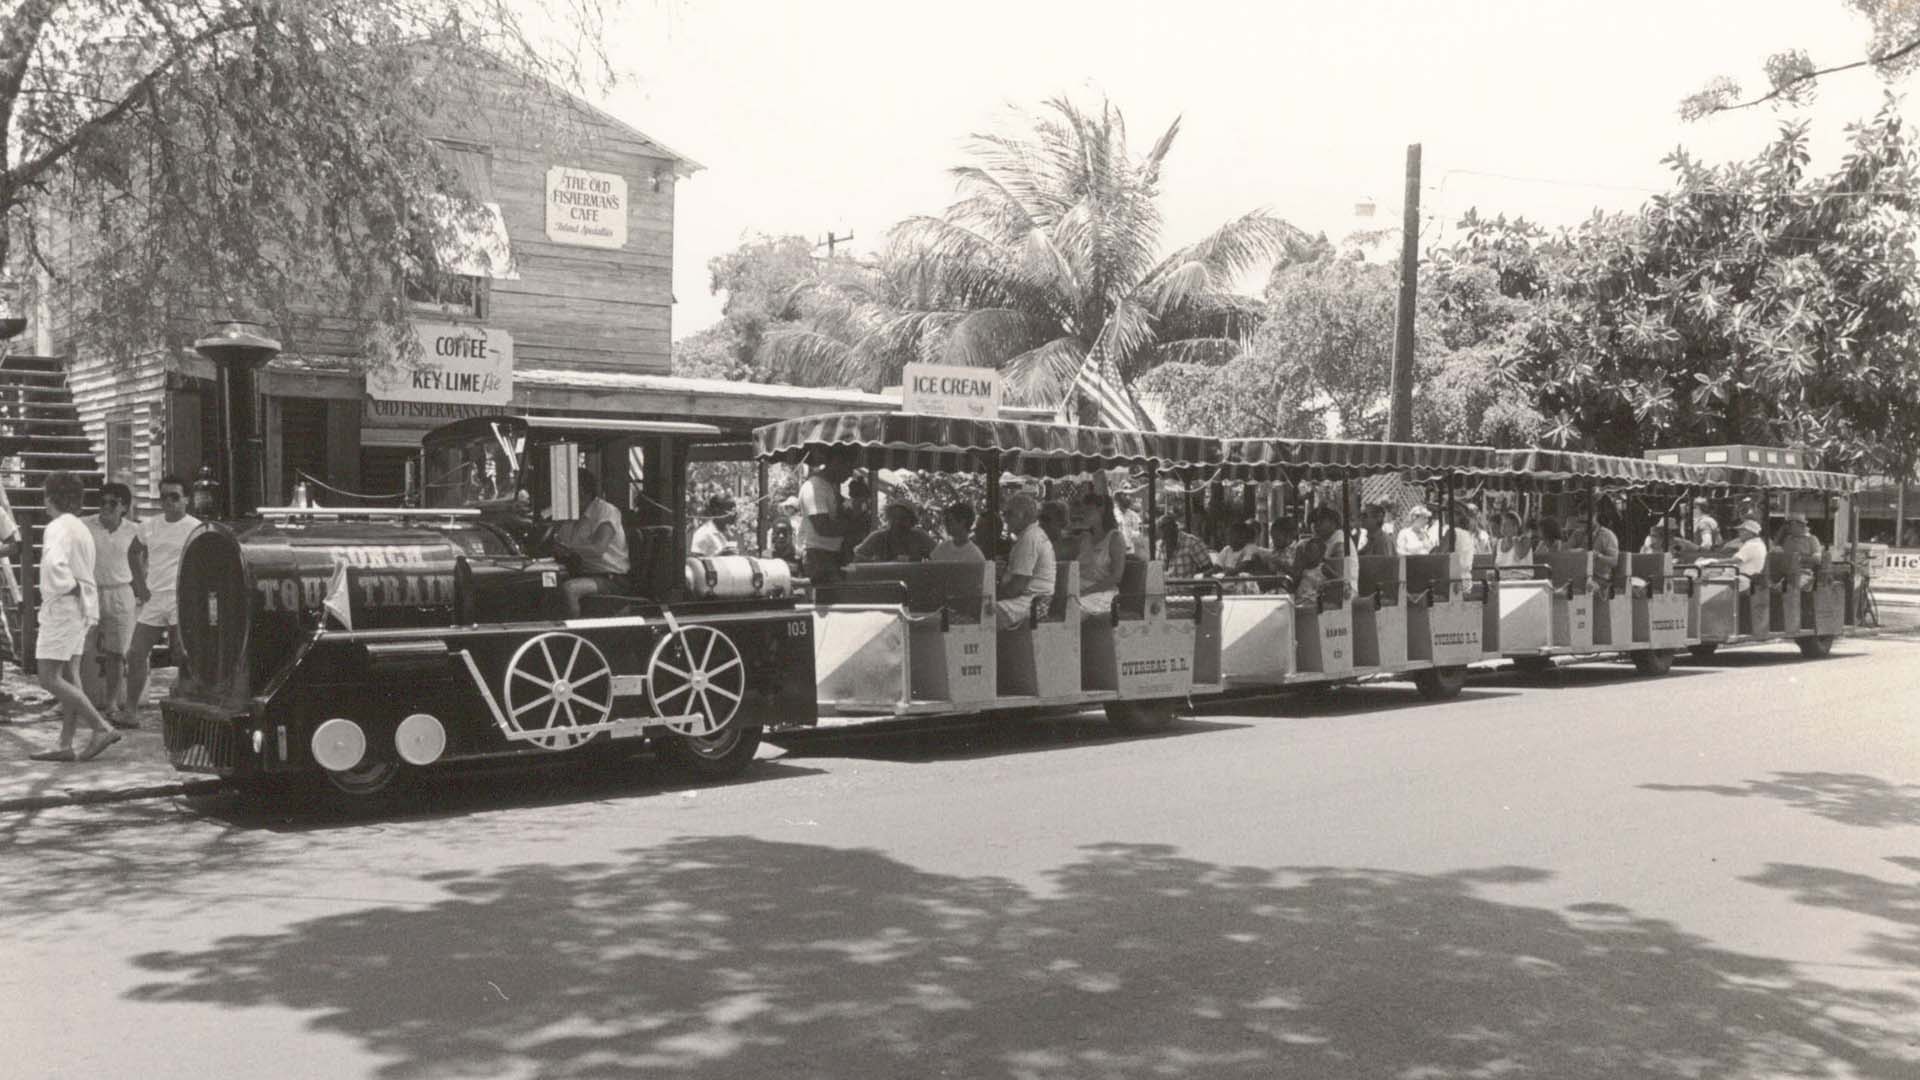 the first conch tour train in key west